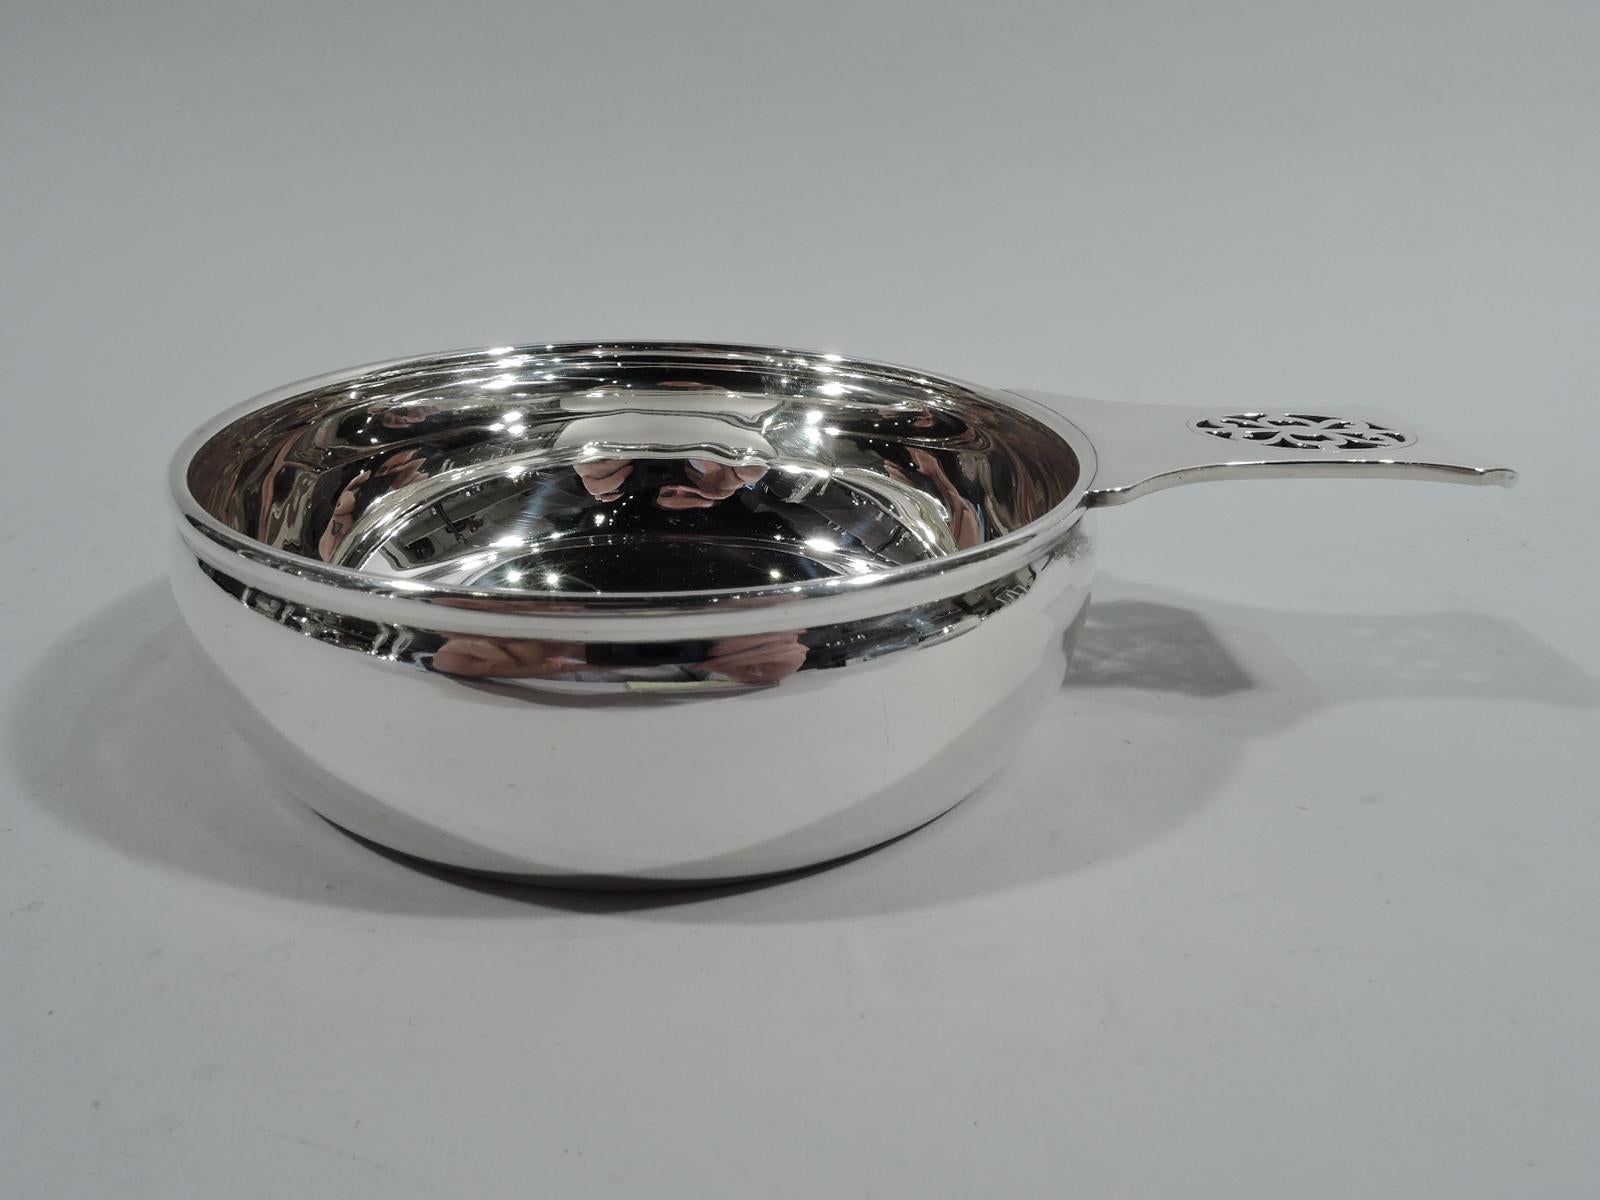 Craftsman sterling silver porringer. Made by Tiffany & Co. in New York, ca 1910. Round bowl with gently curved sides. Solid shaped handle with pierced scrollwork set in open oval. Lots of room for engraving. Fully marked including maker’s stamp,